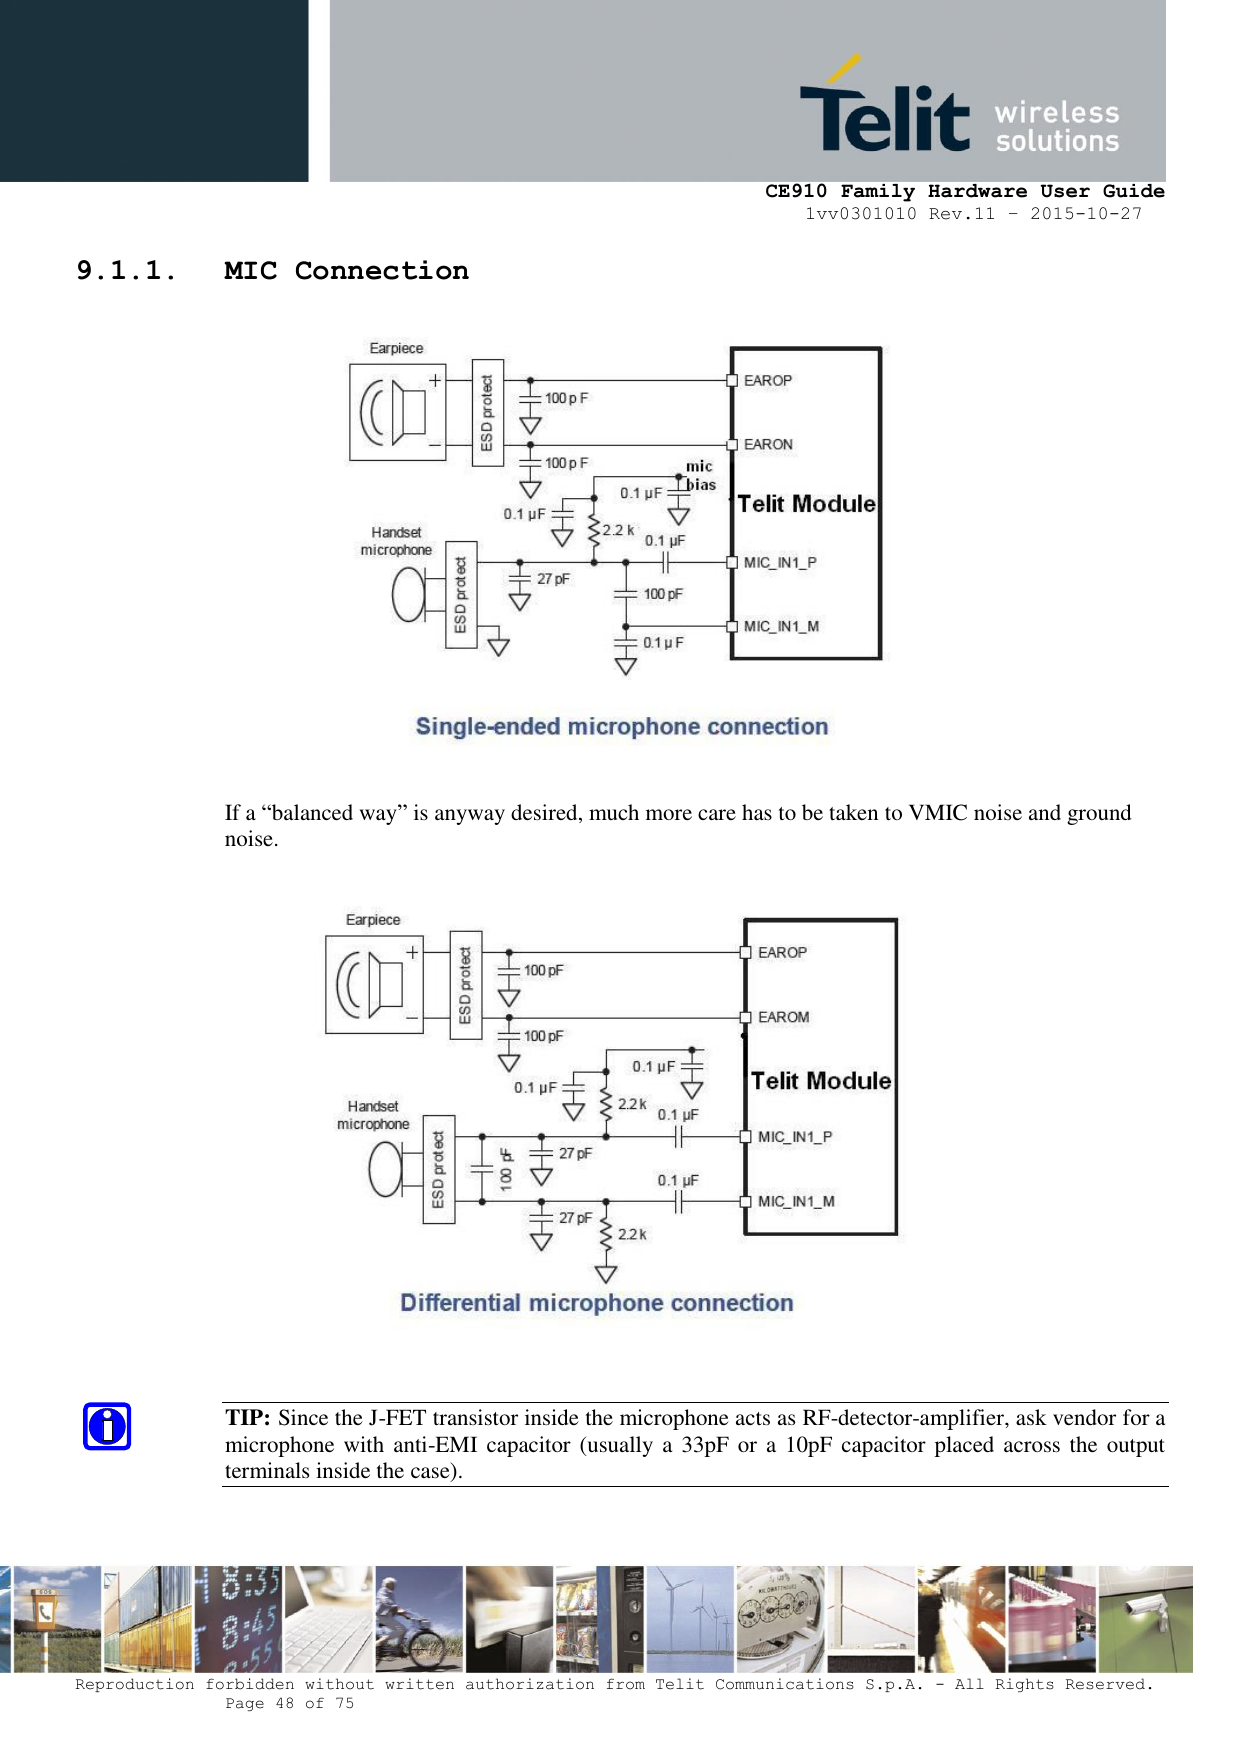     CE910 Family Hardware User Guide 1vv0301010 Rev.11 – 2015-10-27 Reproduction forbidden without written authorization from Telit Communications S.p.A. - All Rights Reserved.    Page 48 of 75                                                     9.1.1. MIC Connection   If a “balanced way” is anyway desired, much more care has to be taken to VMIC noise and ground noise.    TIP: Since the J-FET transistor inside the microphone acts as RF-detector-amplifier, ask vendor for a microphone with anti-EMI capacitor (usually a 33pF  or a  10pF capacitor placed across the output terminals inside the case).  